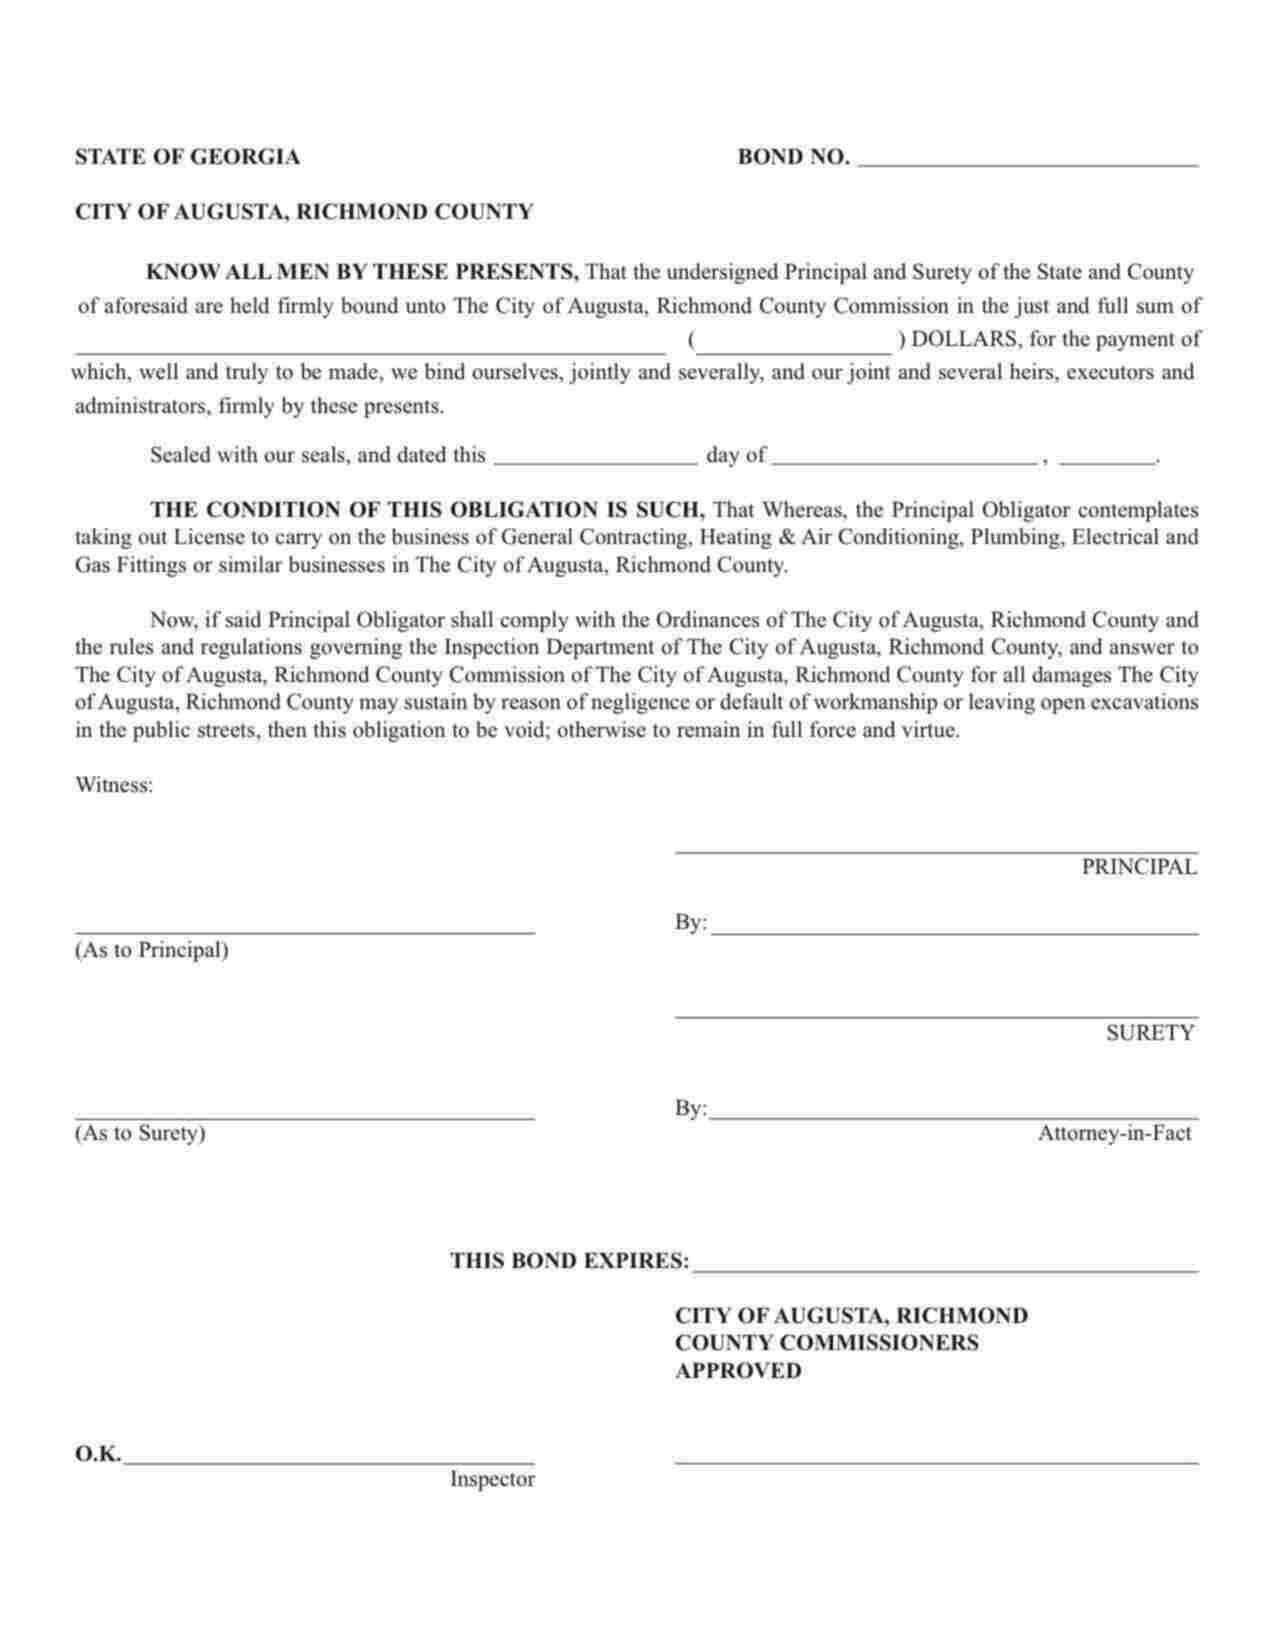 Georgia General Contracting, Plumbing, Electrical or Gas Fitting Bond Form